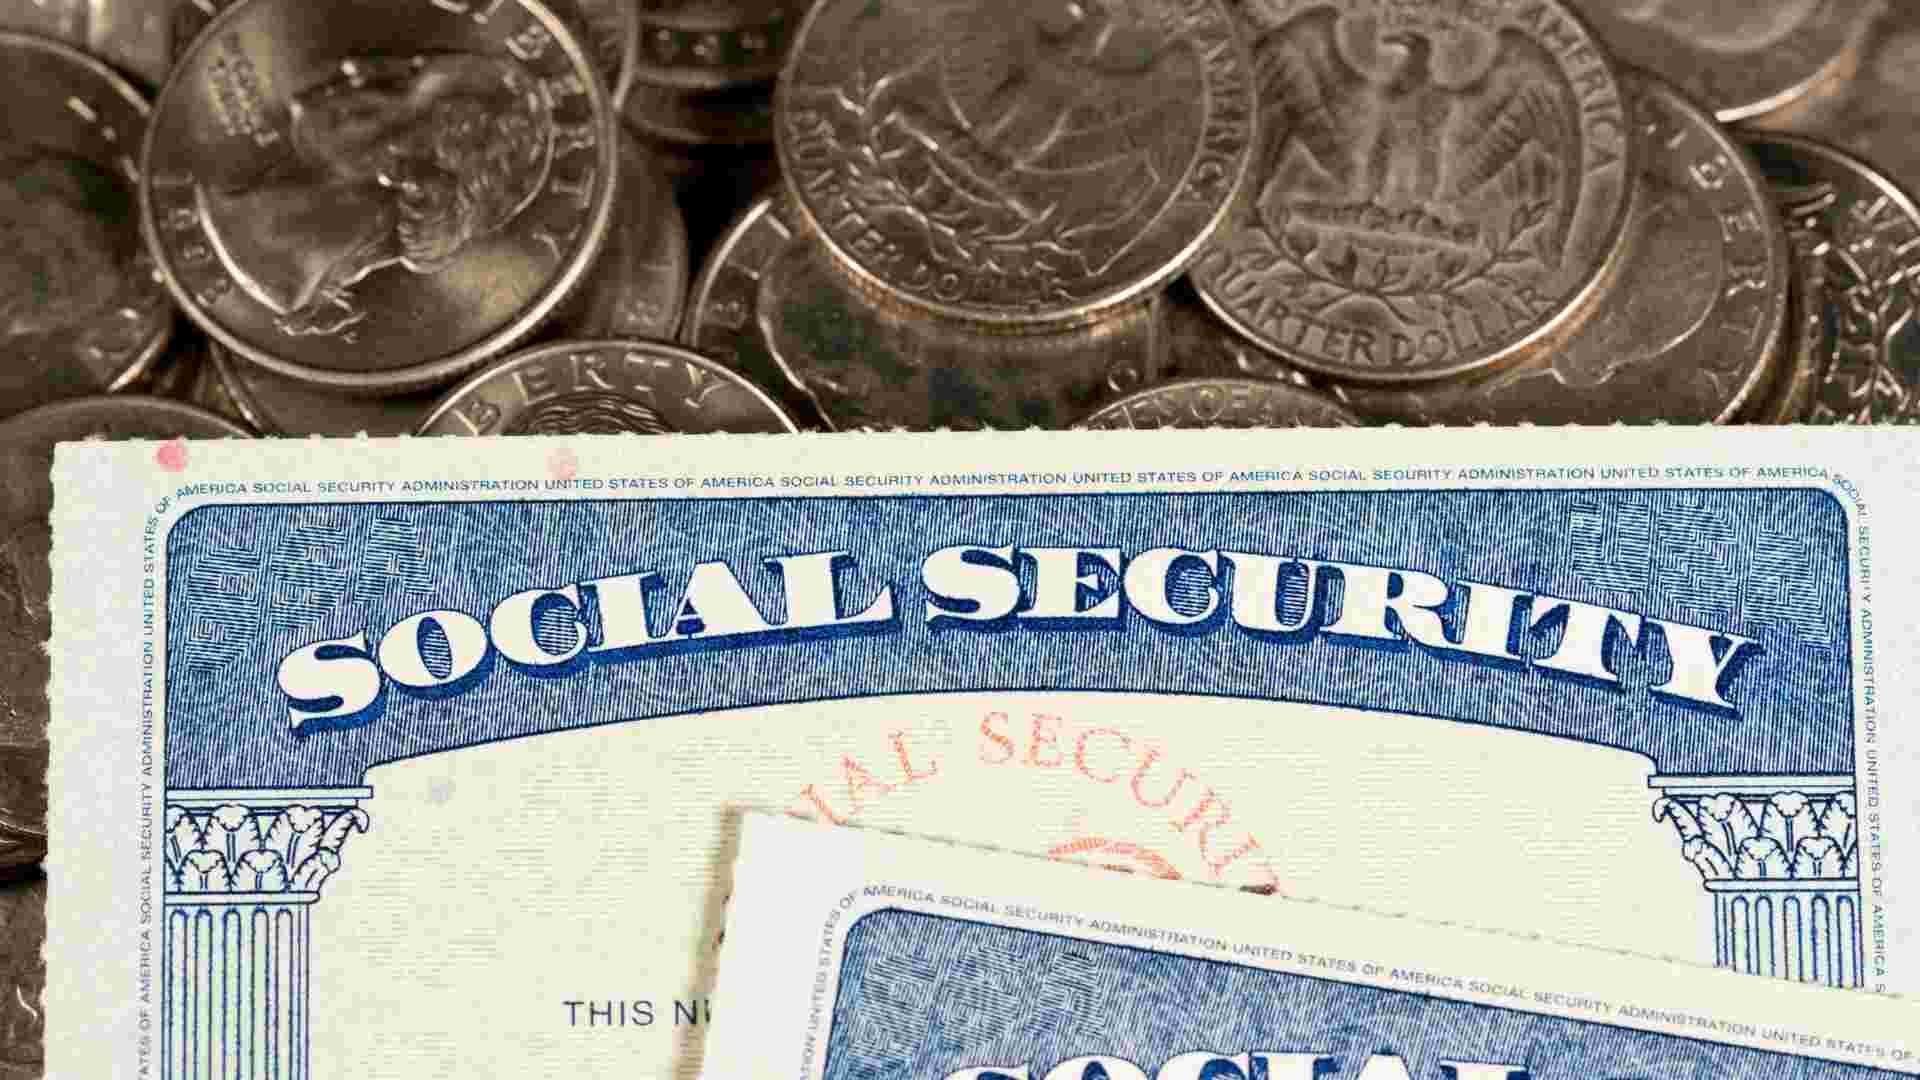 There are many changes that Social Security could bring in the upcoming years